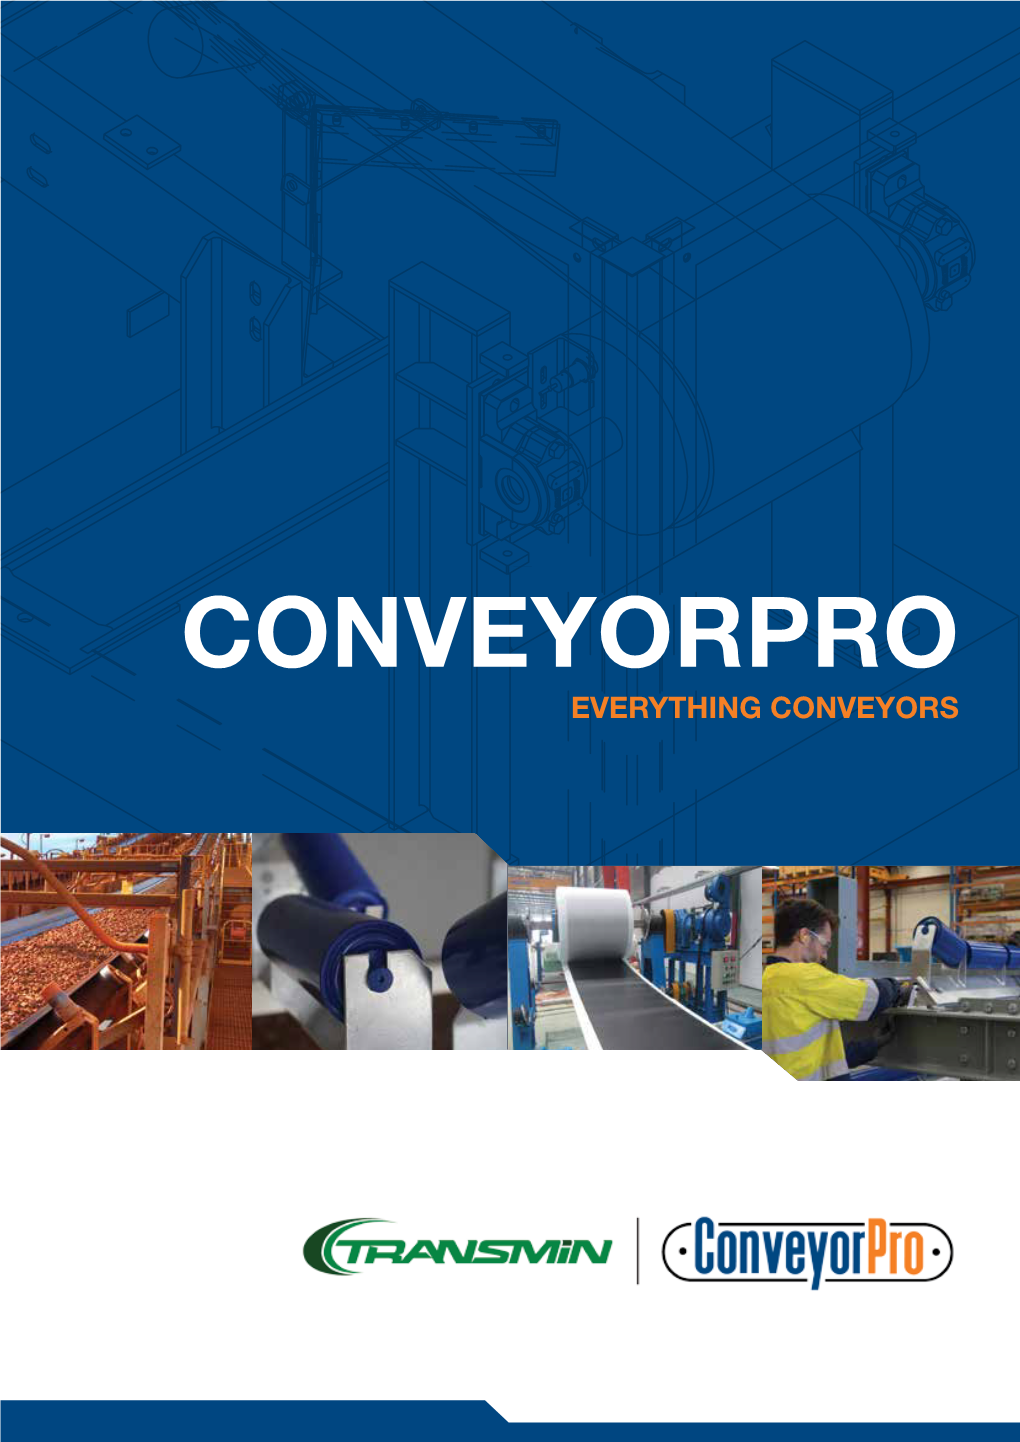 CONVEYORPRO EVERYTHING CONVEYORS the Transmin - Conveyorpro Range Includes Machinery, Equipment, Parts, Servicing and Engineering All Under One Roof